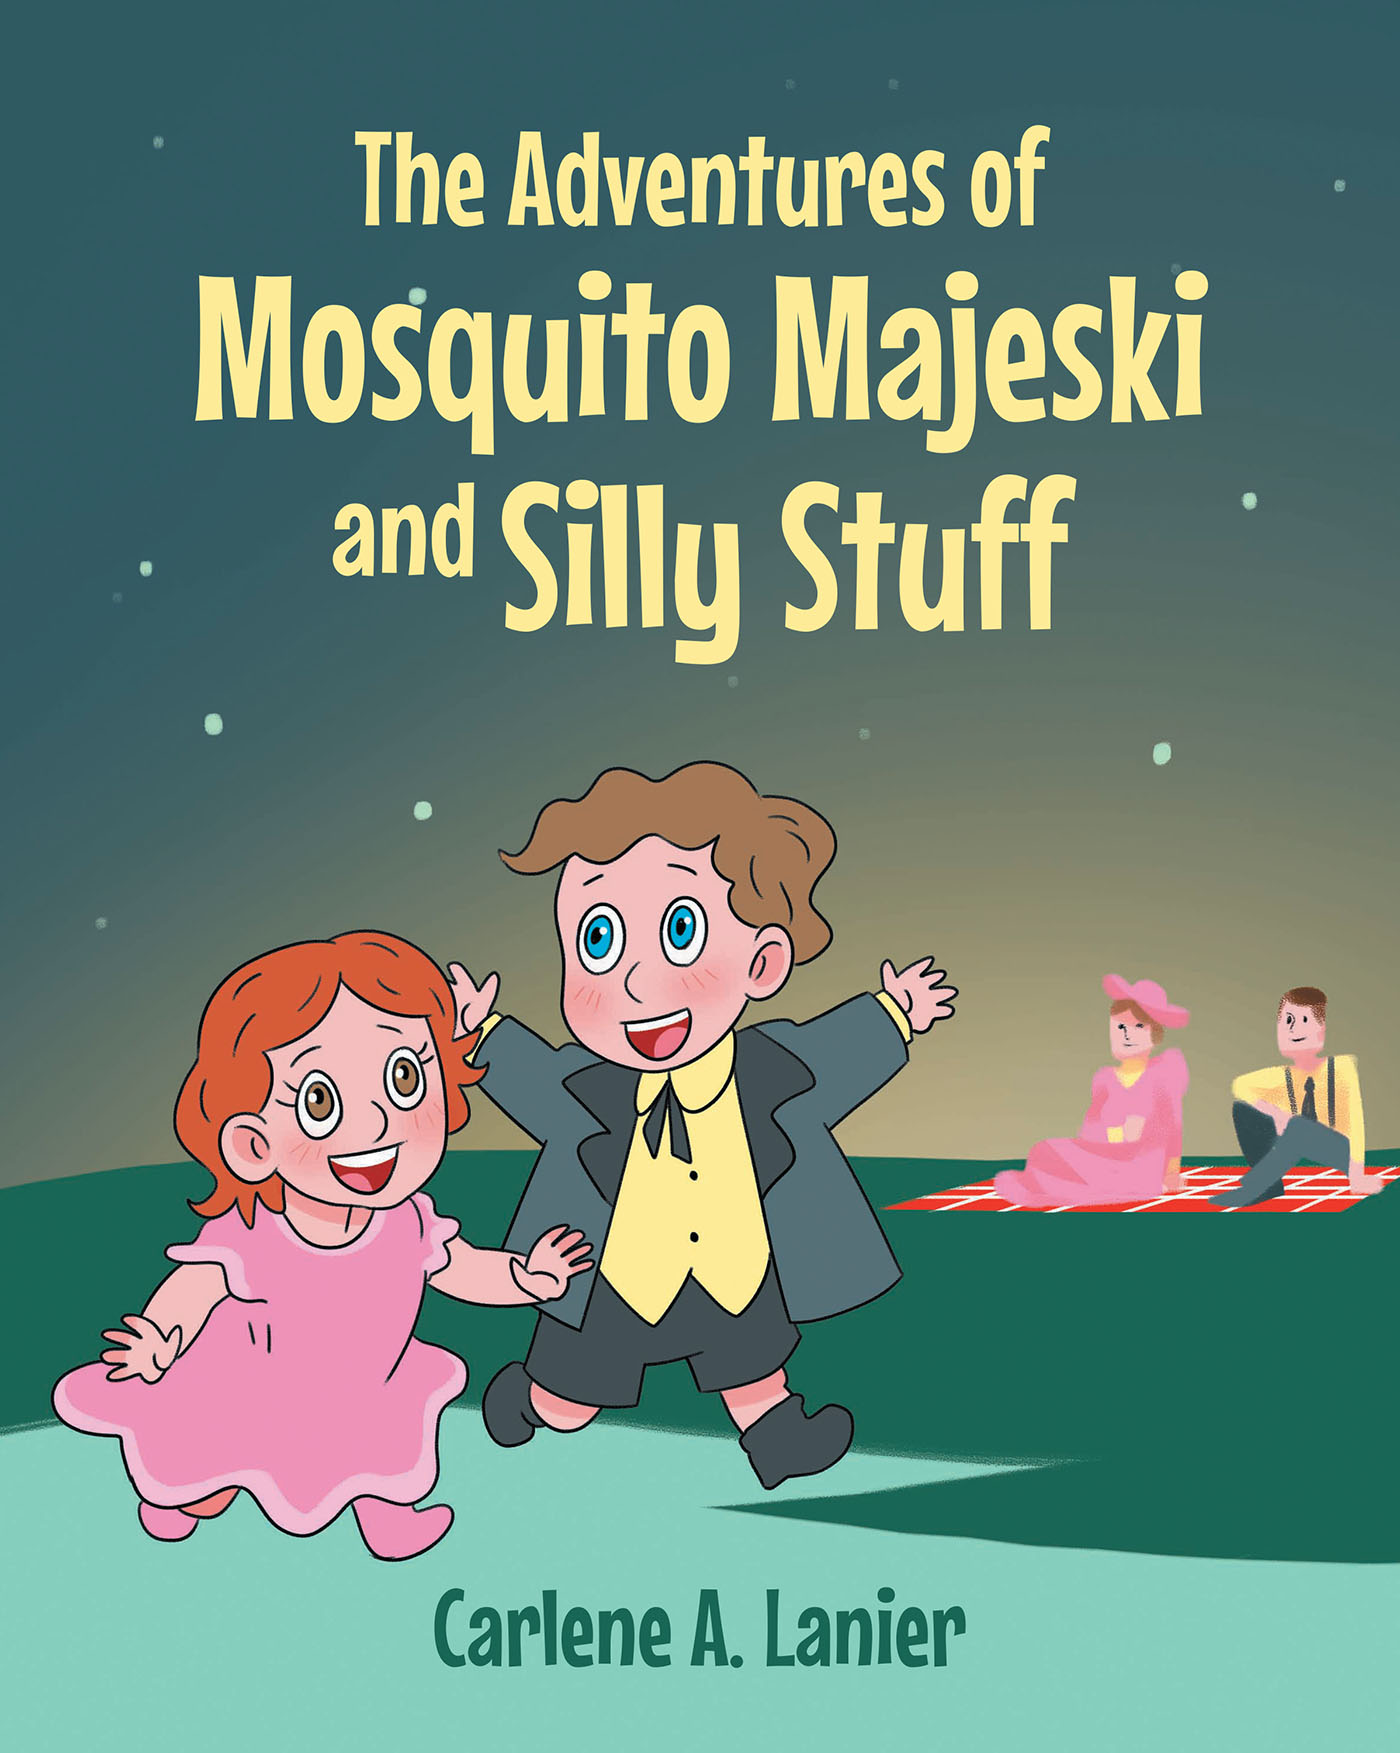 Author Carlene A. Lanier’s New Book, "The Adventures of Mosquito Majeski and Silly Stuff," Recounts the Author's Riveting Memories of Growing Up on Her Grandparents' Farm